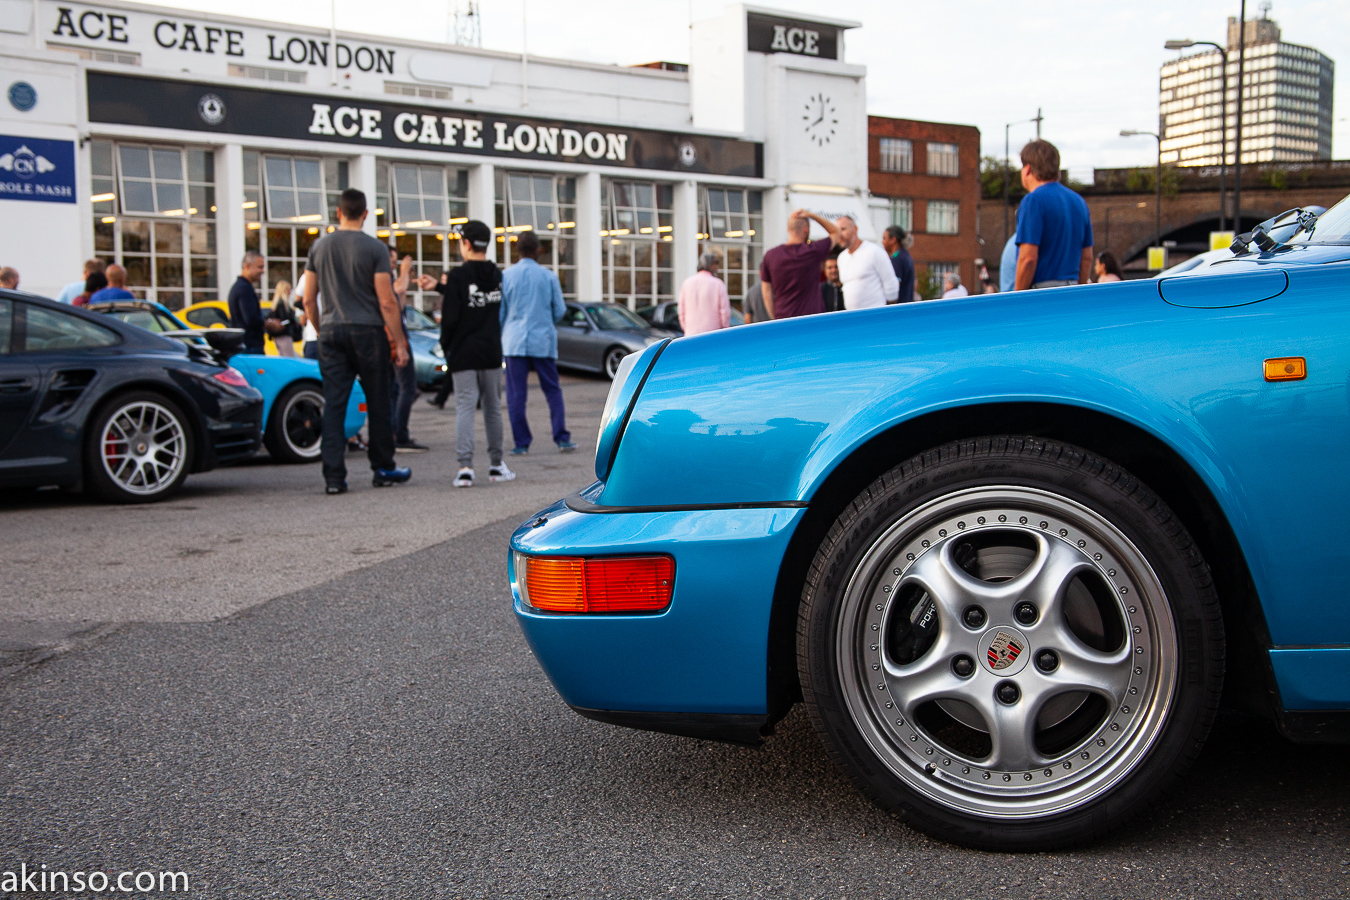 Porsche Night at The Ace Cafe – A Pictorial